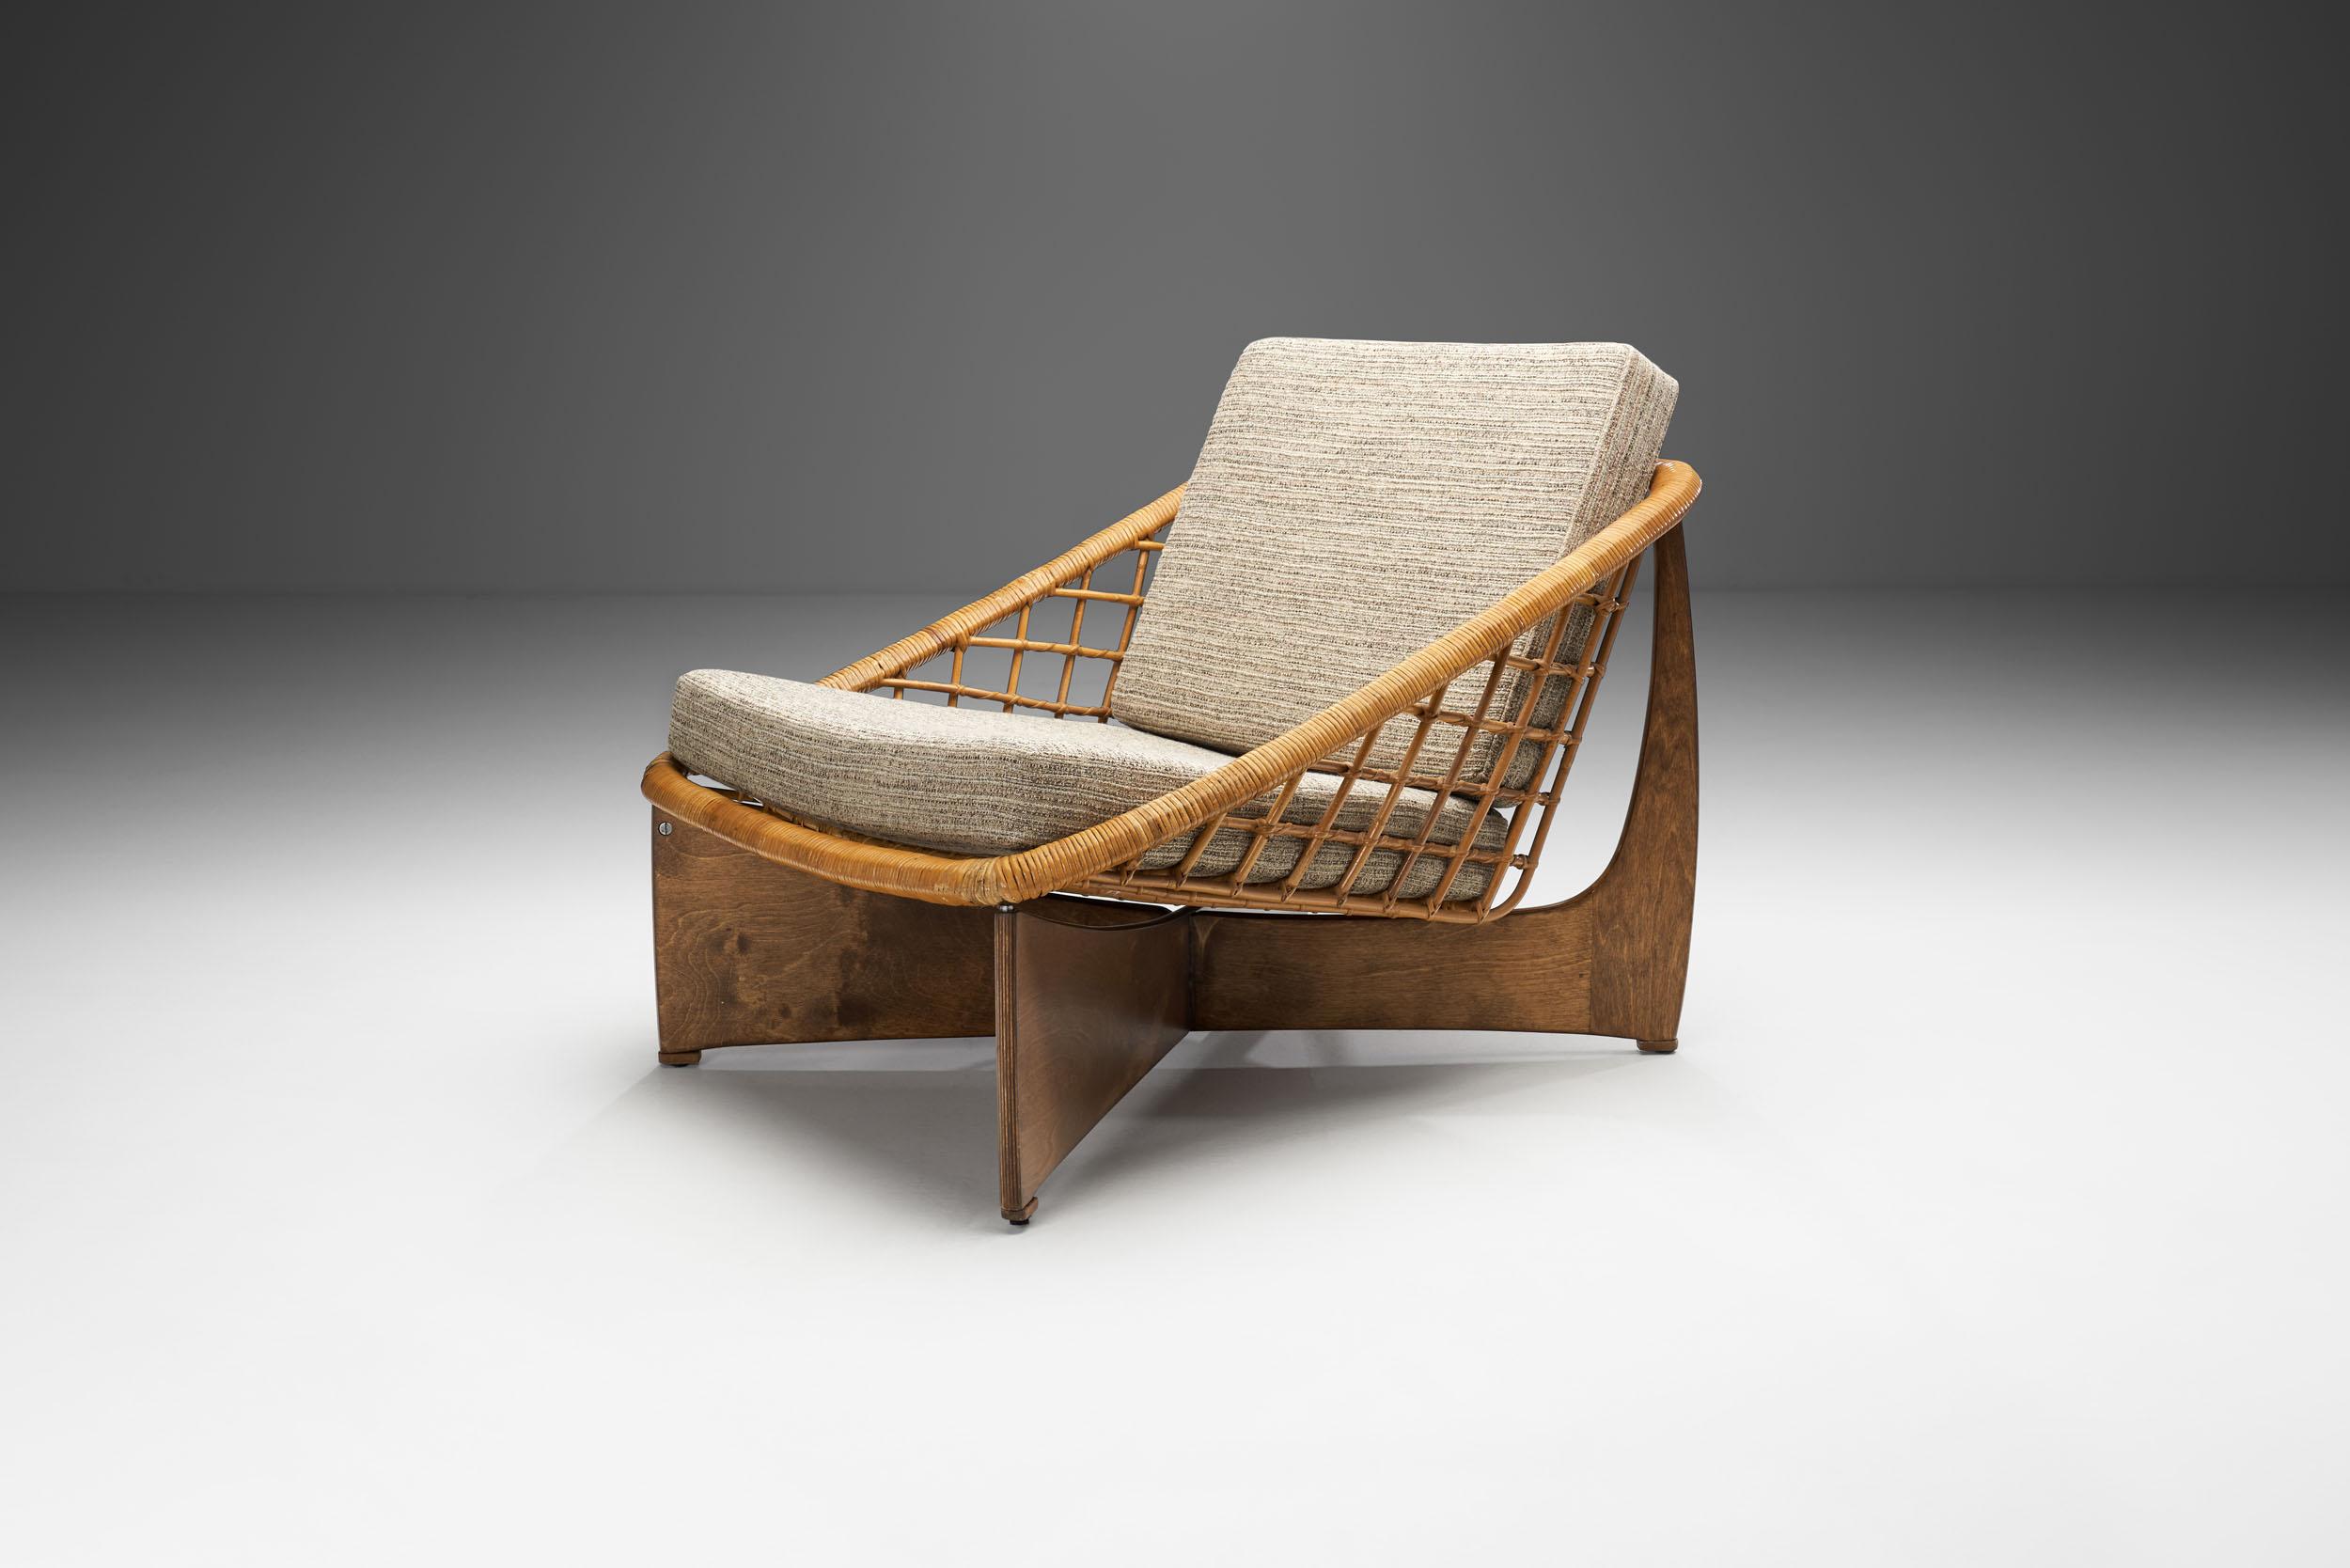 This “Rokato” lounge chair is an immediately recognizable design by the Dutch designers, Gebroeders Jonkers (Jonkers Brothers). In the middle of the last century, rattan played an important role in Dutch Design. The cradle was located in Noordwolde